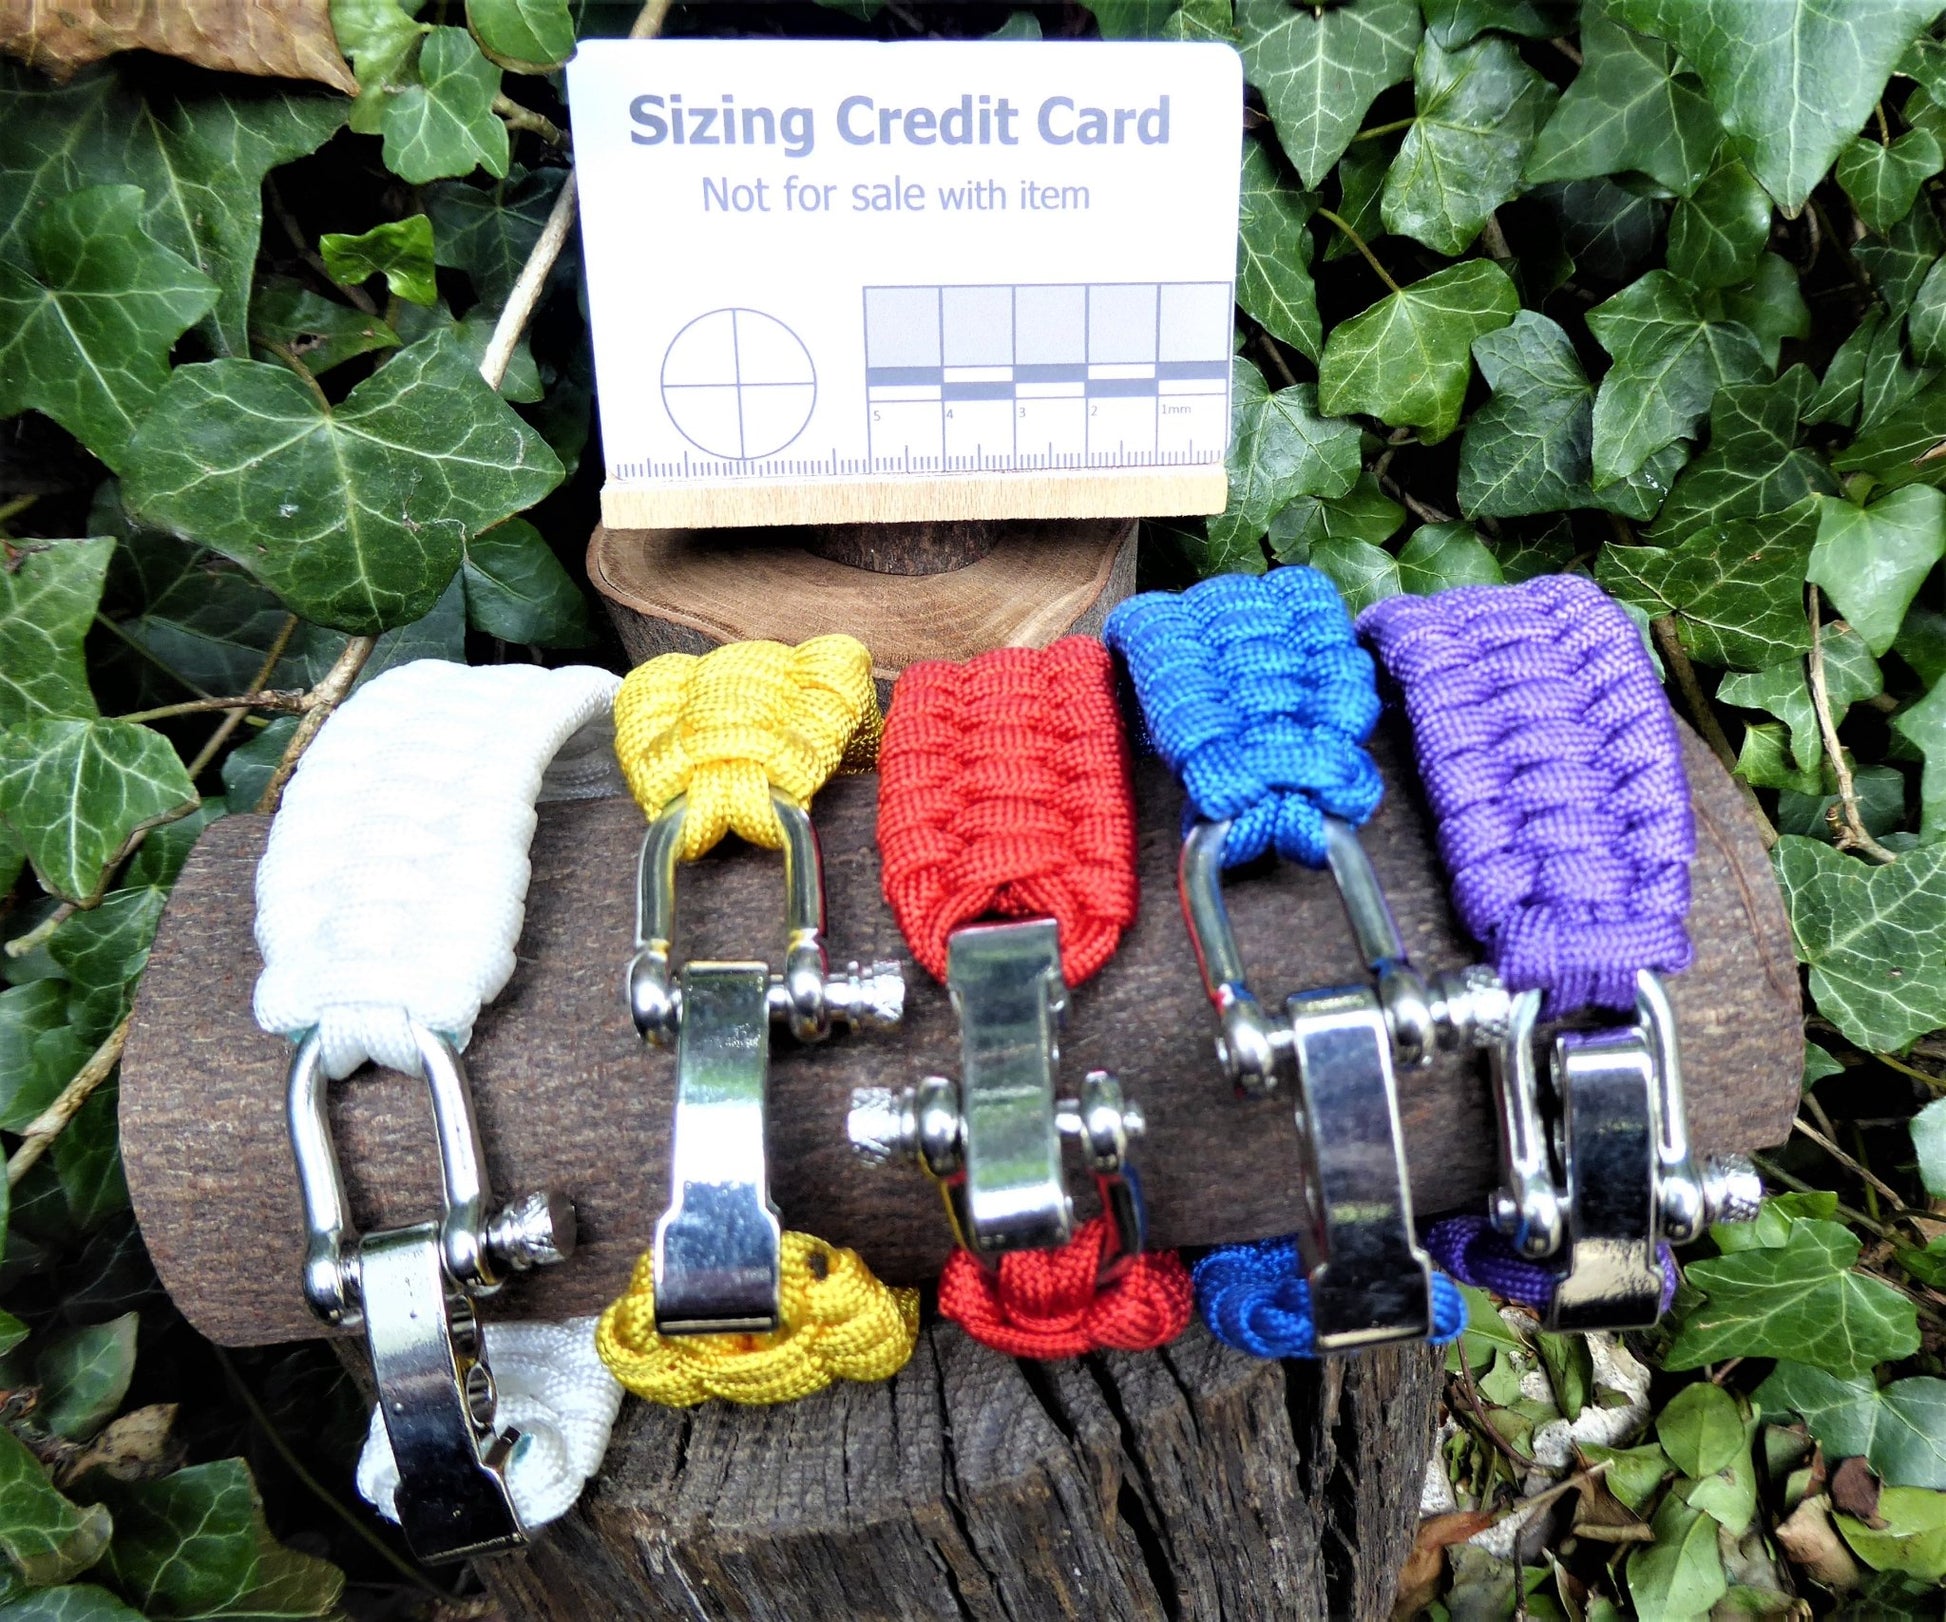 Metal Buckle Paracord Bracelet. Valuable tool in survival situations, as it can be used to make traps, snares, fishing lines, and even a bow drill for starting fires.  Hugginsattic    [Huggins attic]